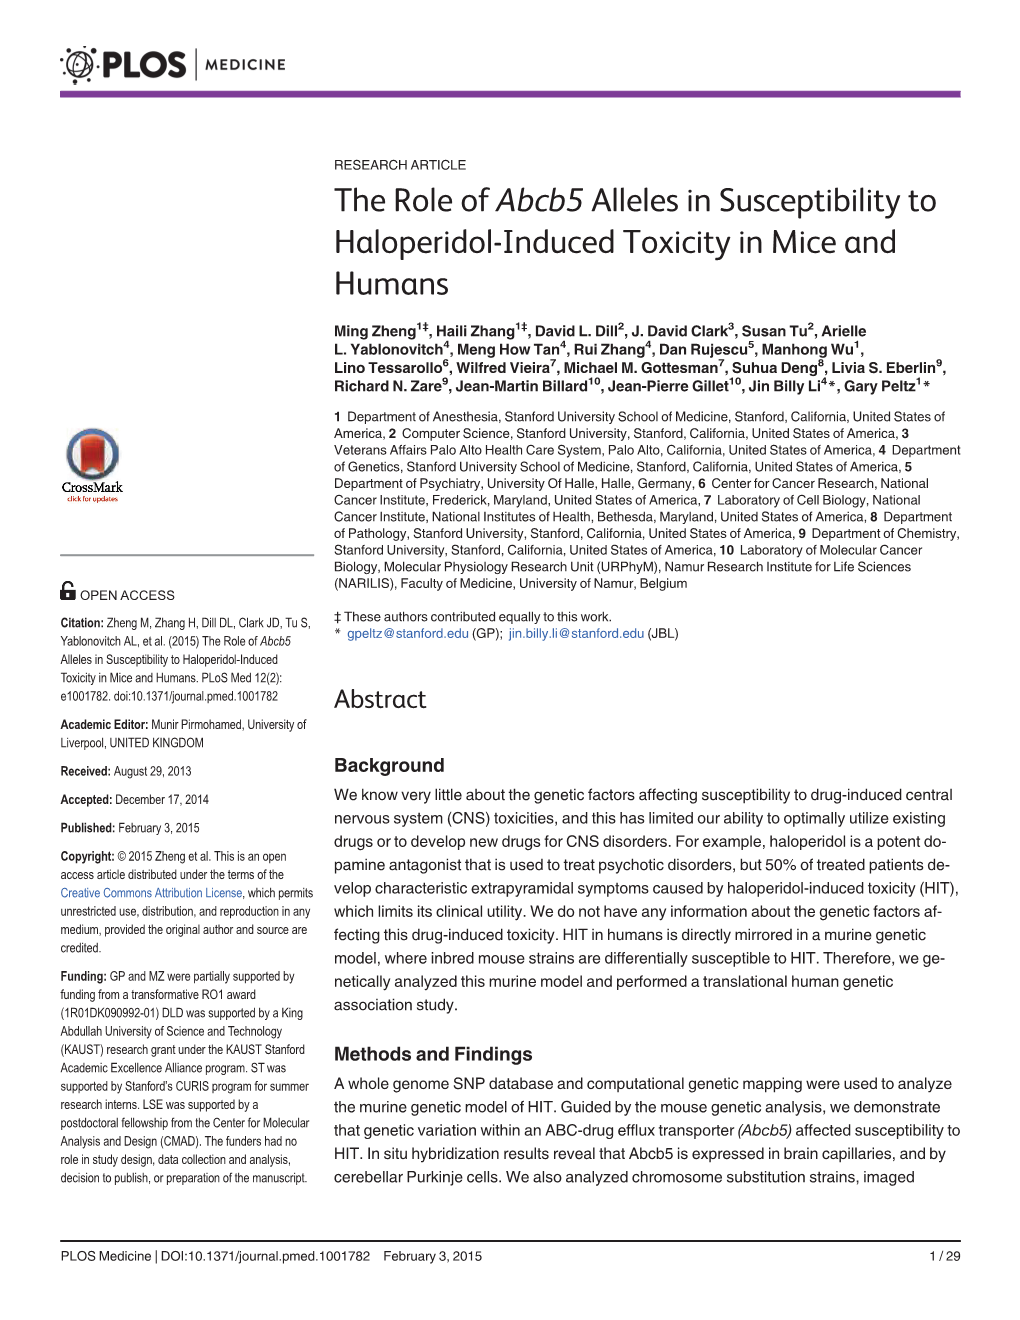 The Role of Abcb5 Alleles in Susceptibility to Haloperidol-Induced Toxicity in Mice and Humans